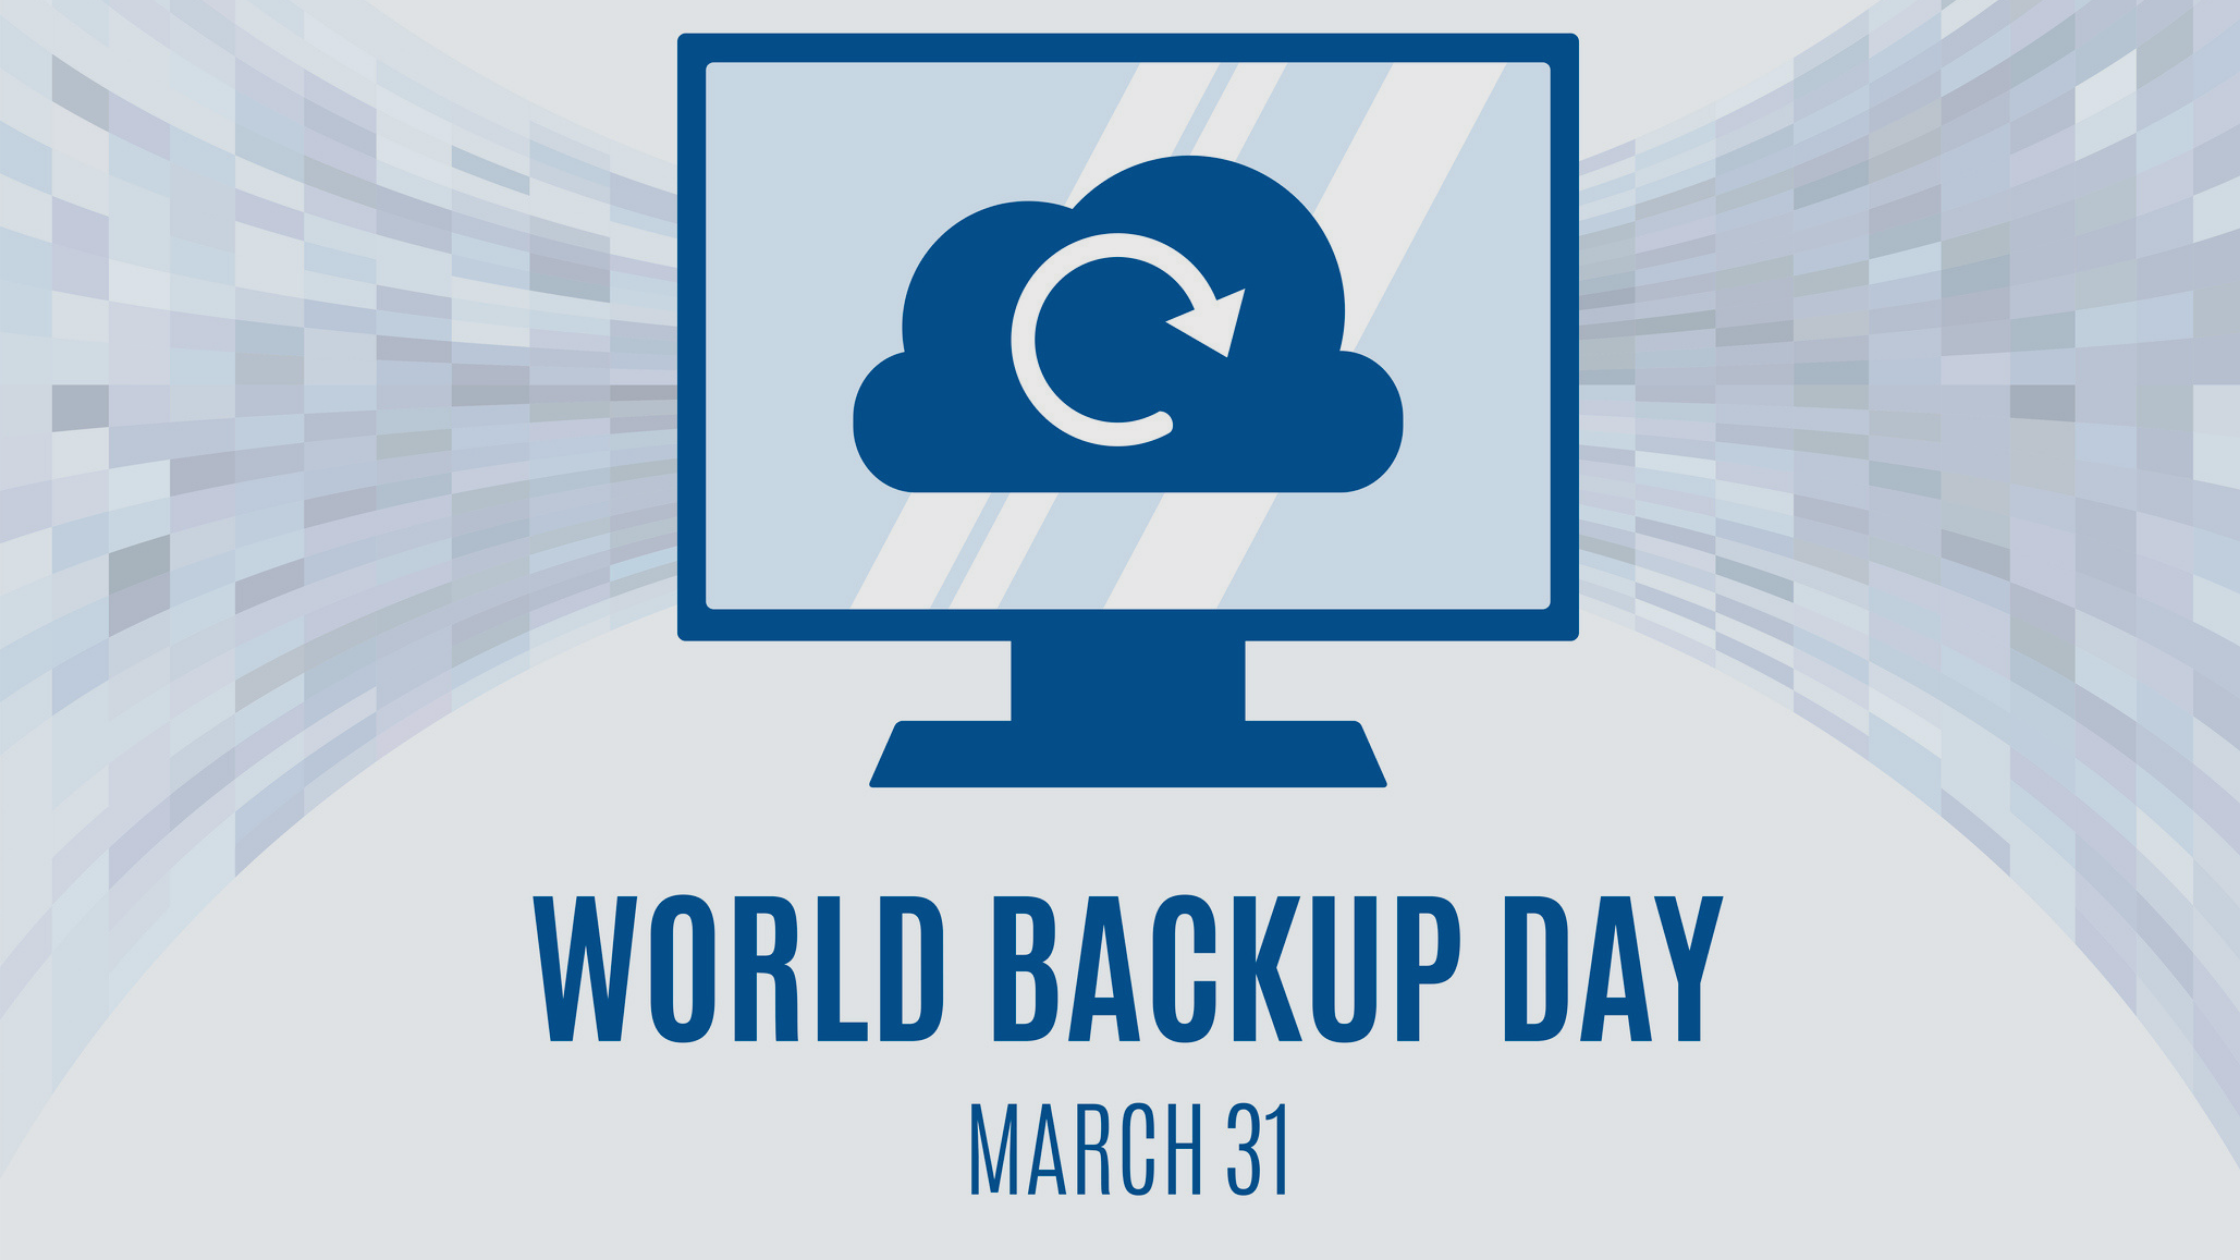 World Backup Day
March 31